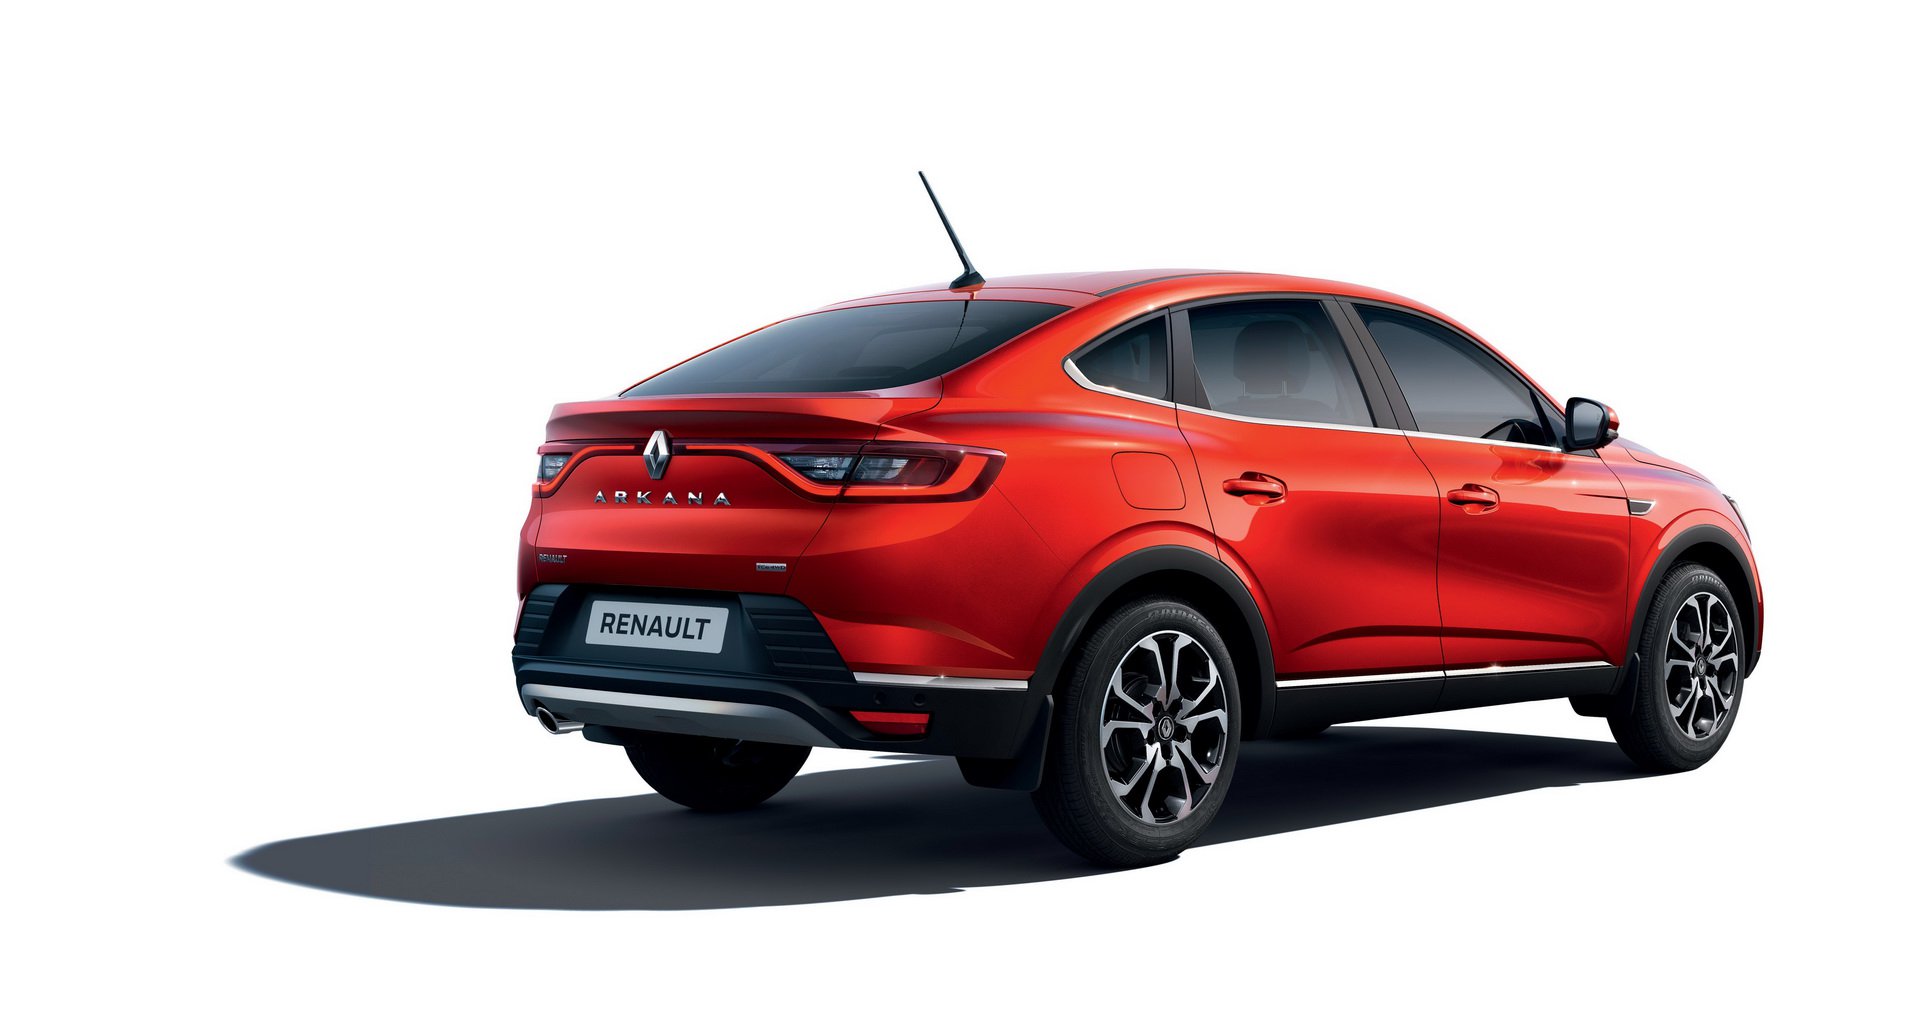 Renault Arkana Debuts as Affordable BMW X6 for the Russian Working